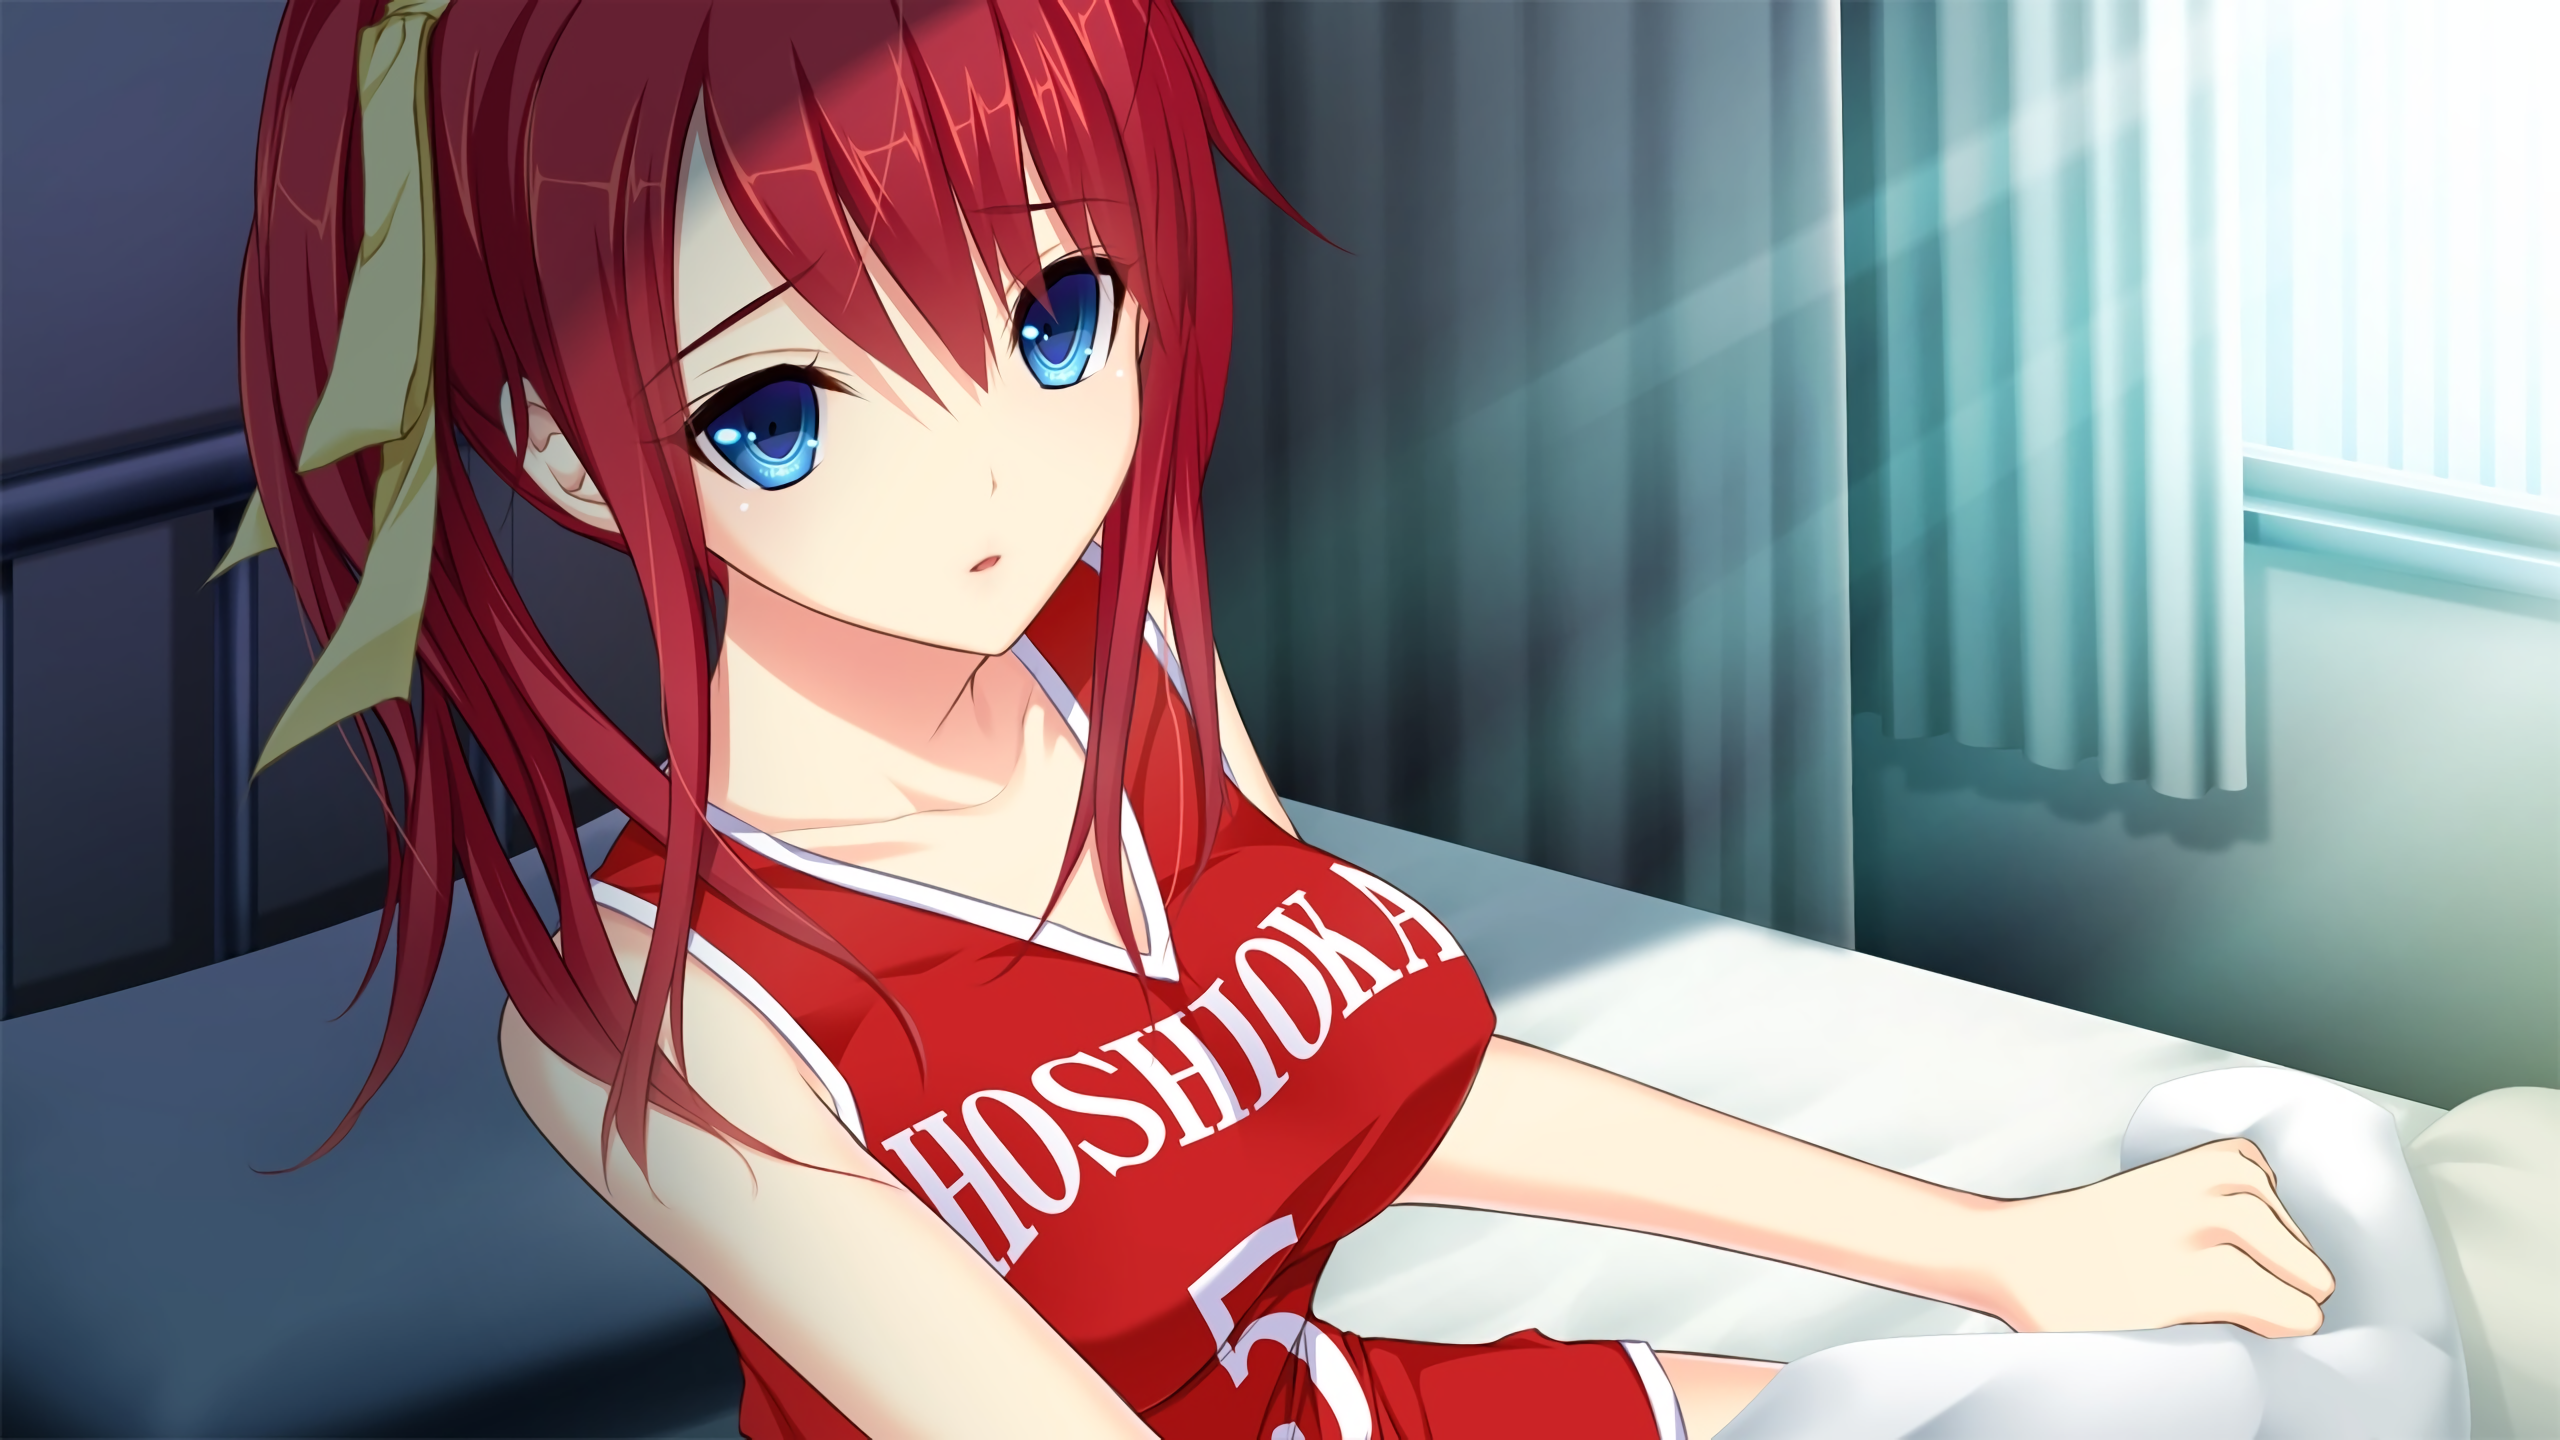 Anime 2560x1440 manga anime girls redhead anime big boobs blue eyes Hatsukoi 1/1 boobs numbers printed shirts red clothing in bed bed bedroom face long hair women indoors looking at viewer curvy